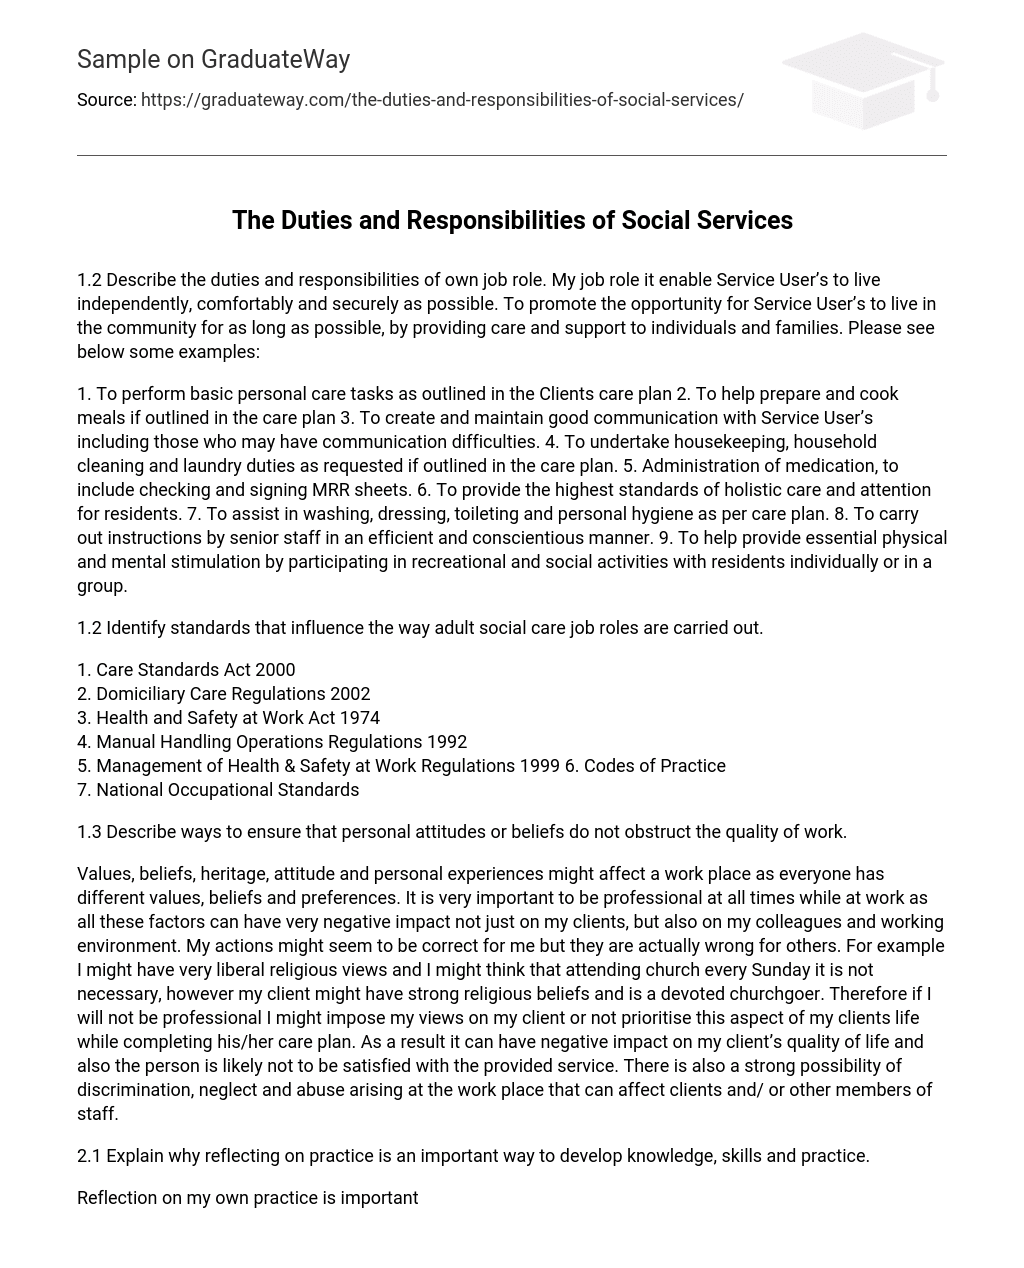 The Duties and Responsibilities of Social Services